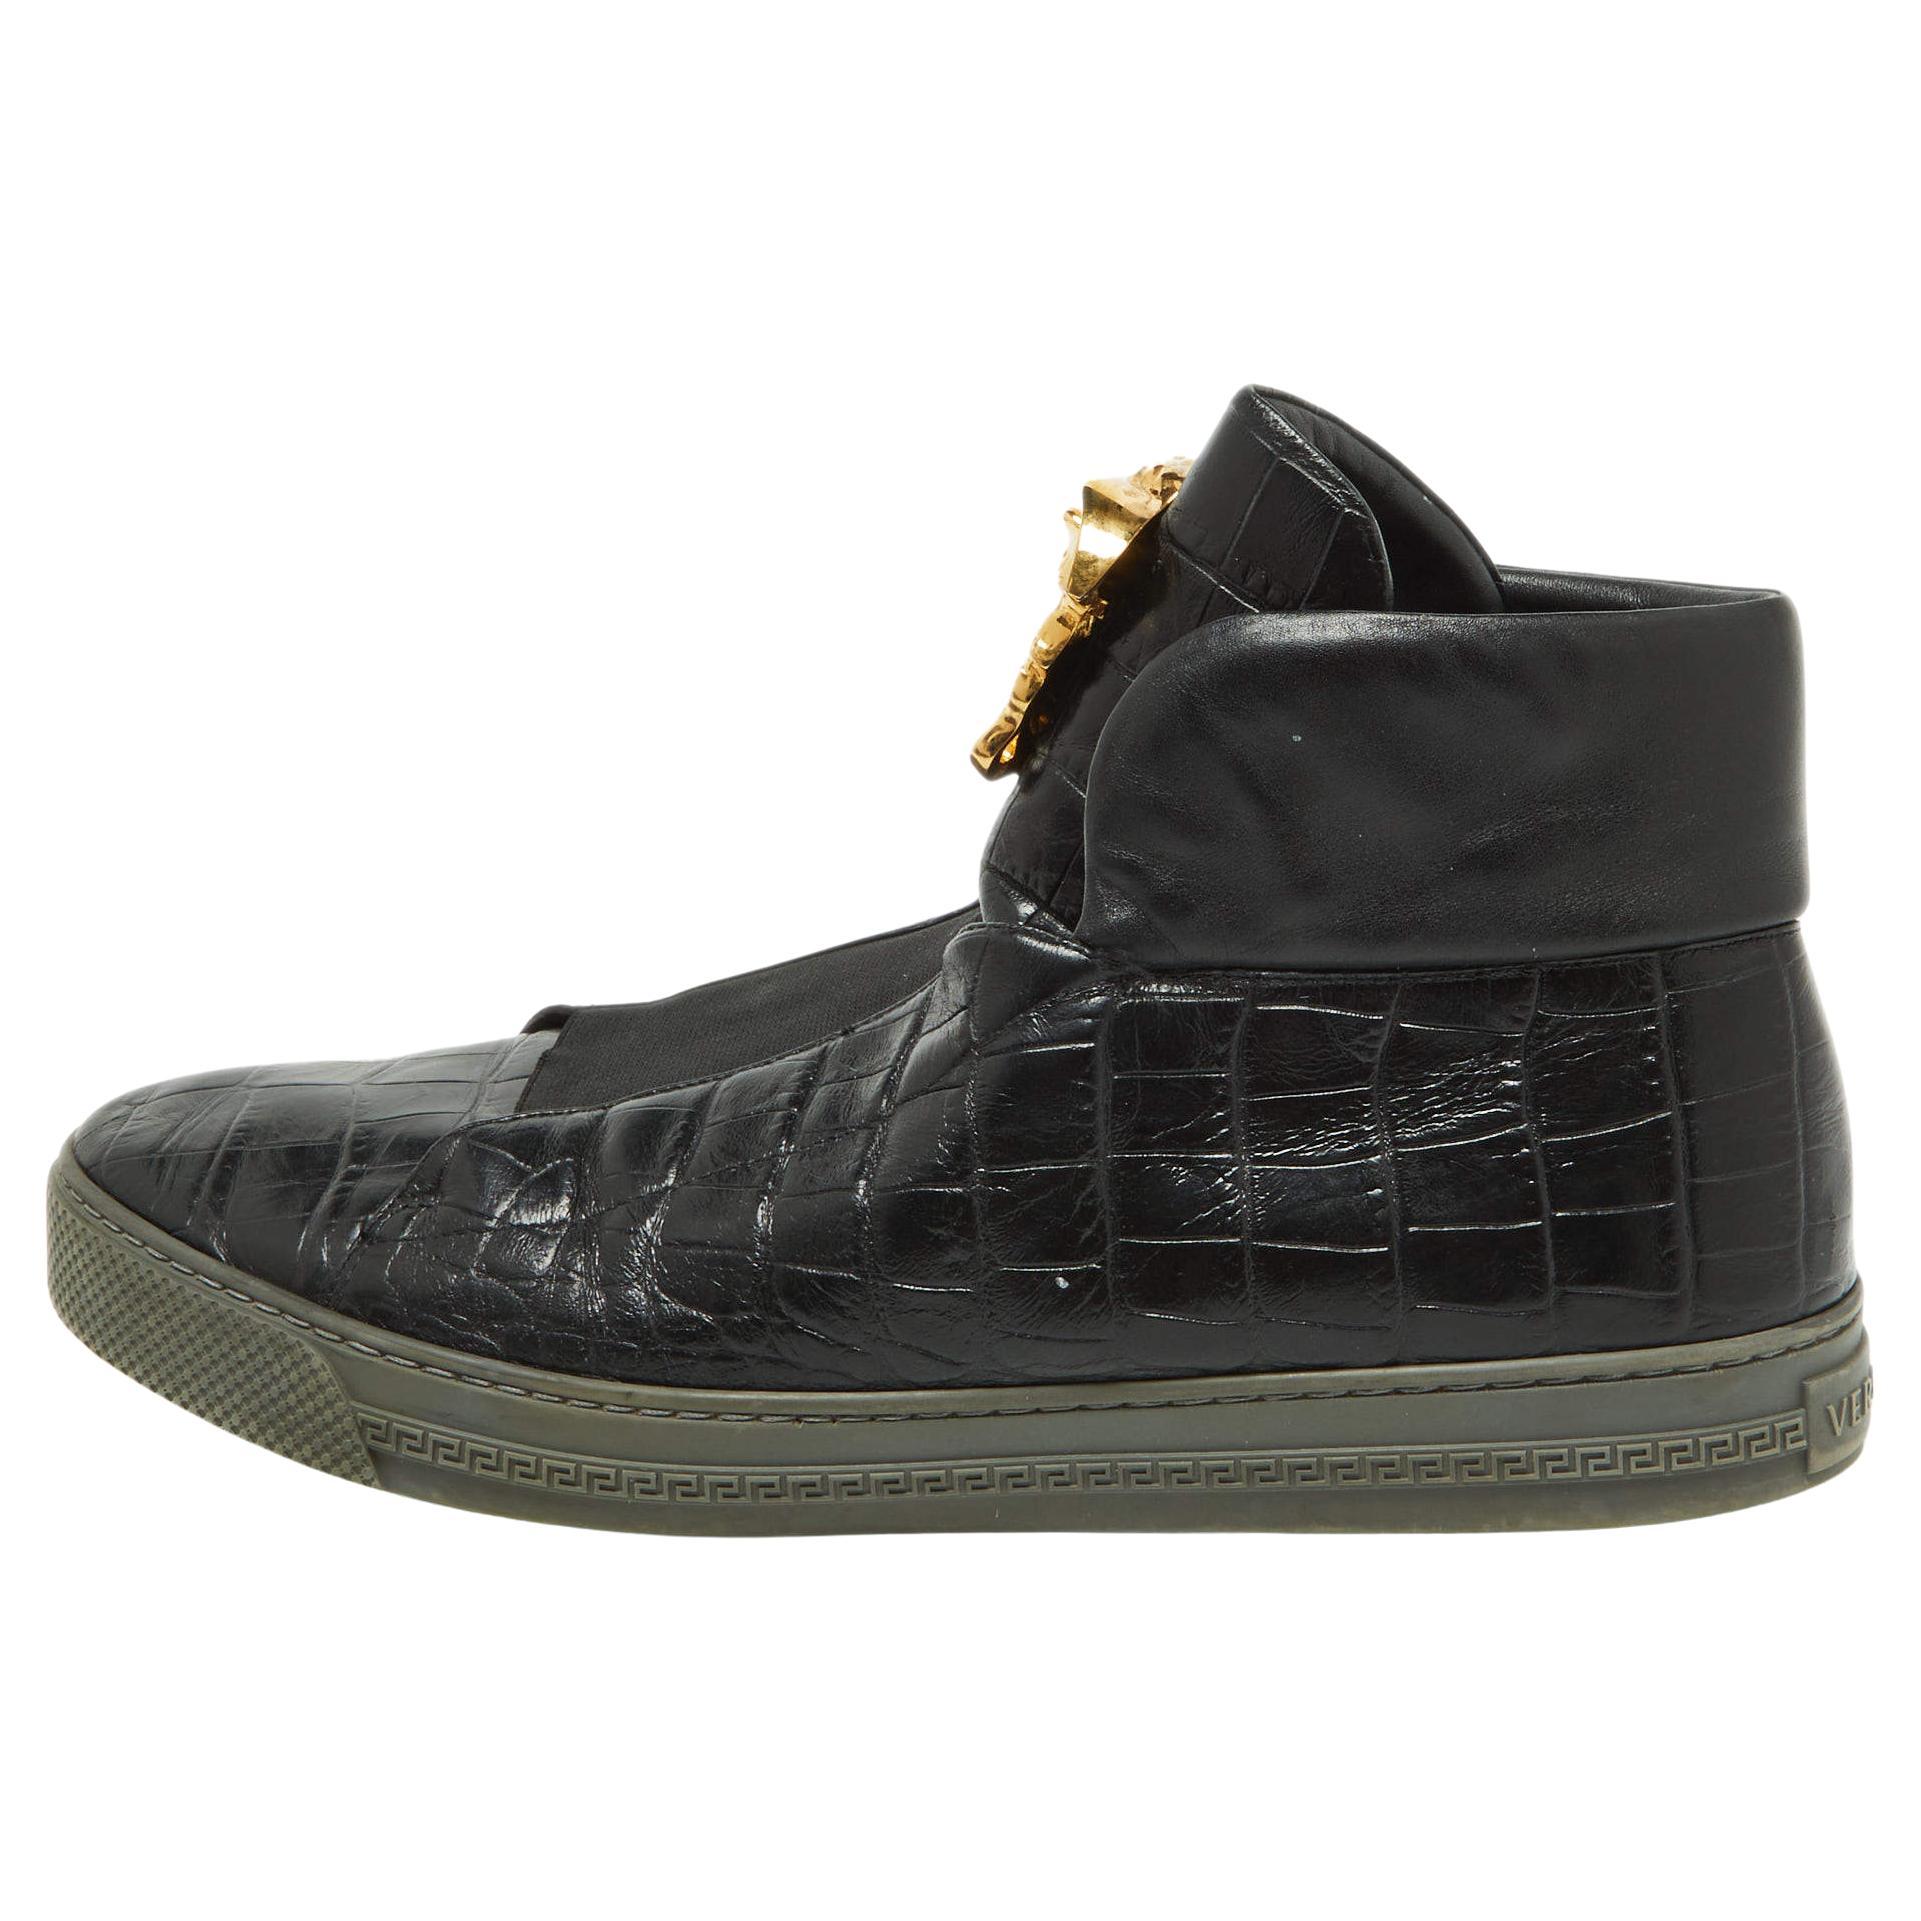 Versace Black Croc Embossed Leather Palazzo Medusa High Top Sneakers Size 44 For Sale